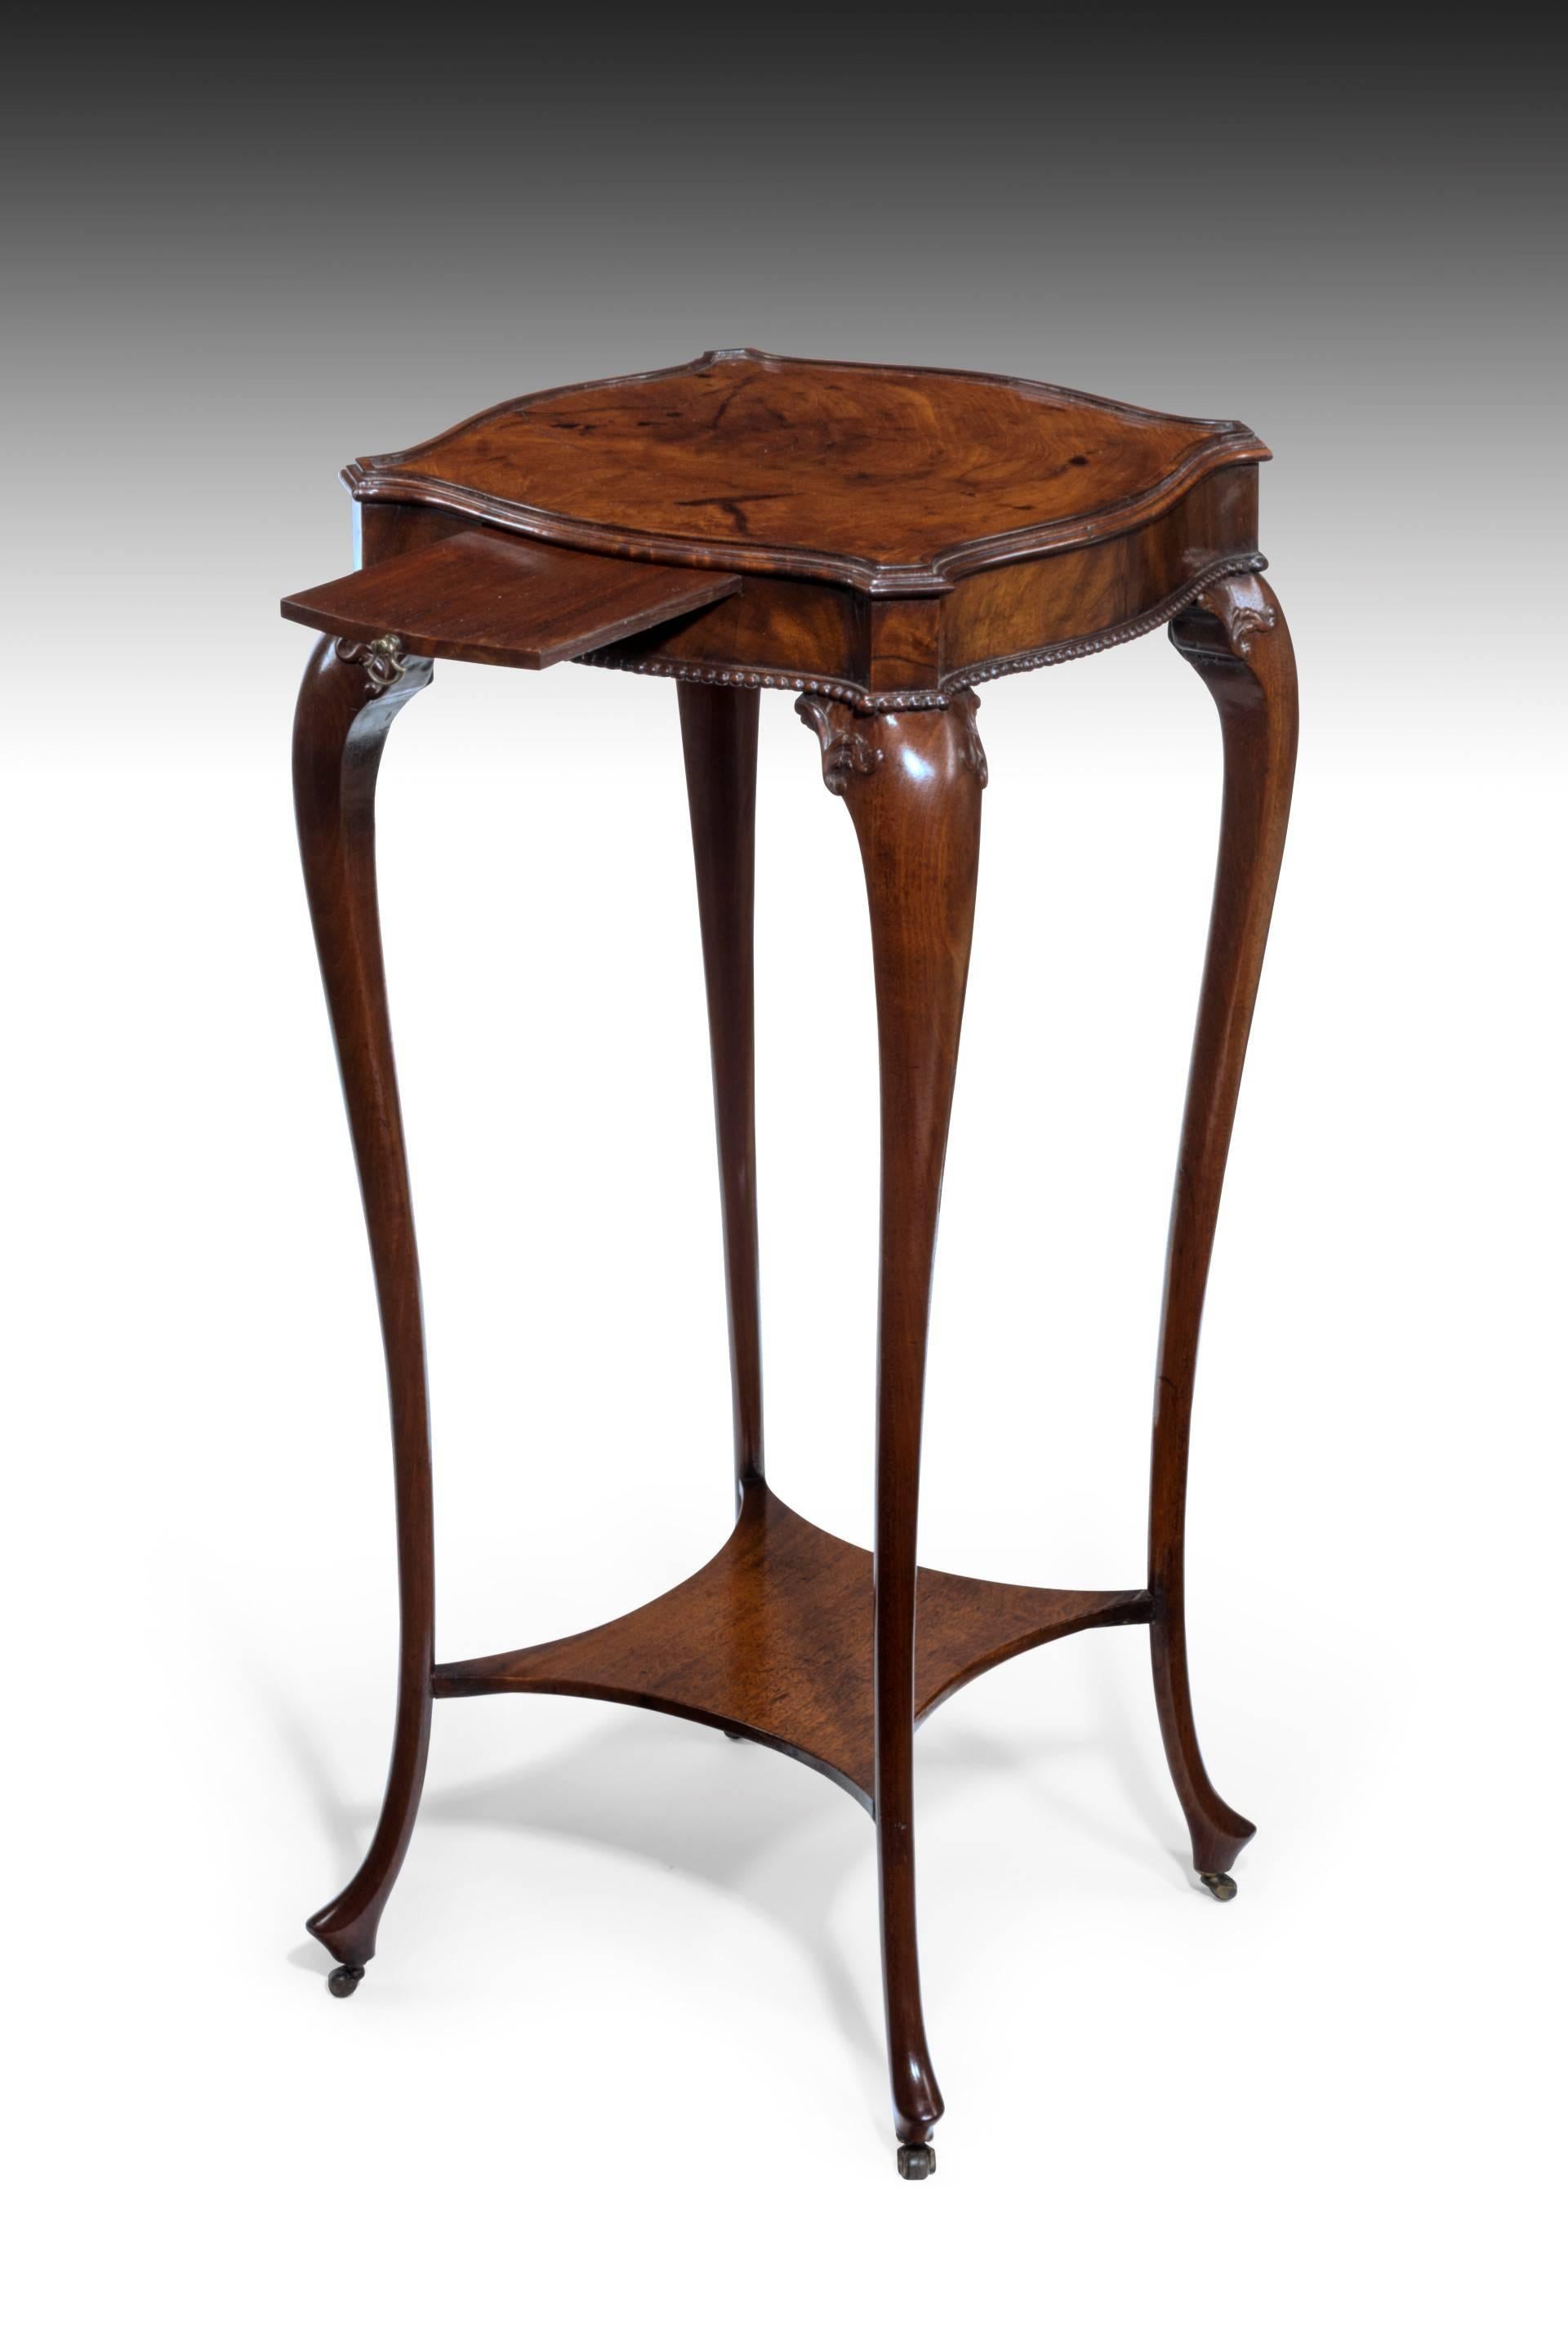 A Fine George III period carved mahogany urn table. With a serpentine square top with a moulded edge over a shaped frieze and bead moulded border, one side with pull-out slide with brass axe-head handle. The well drawn and beautifully slender